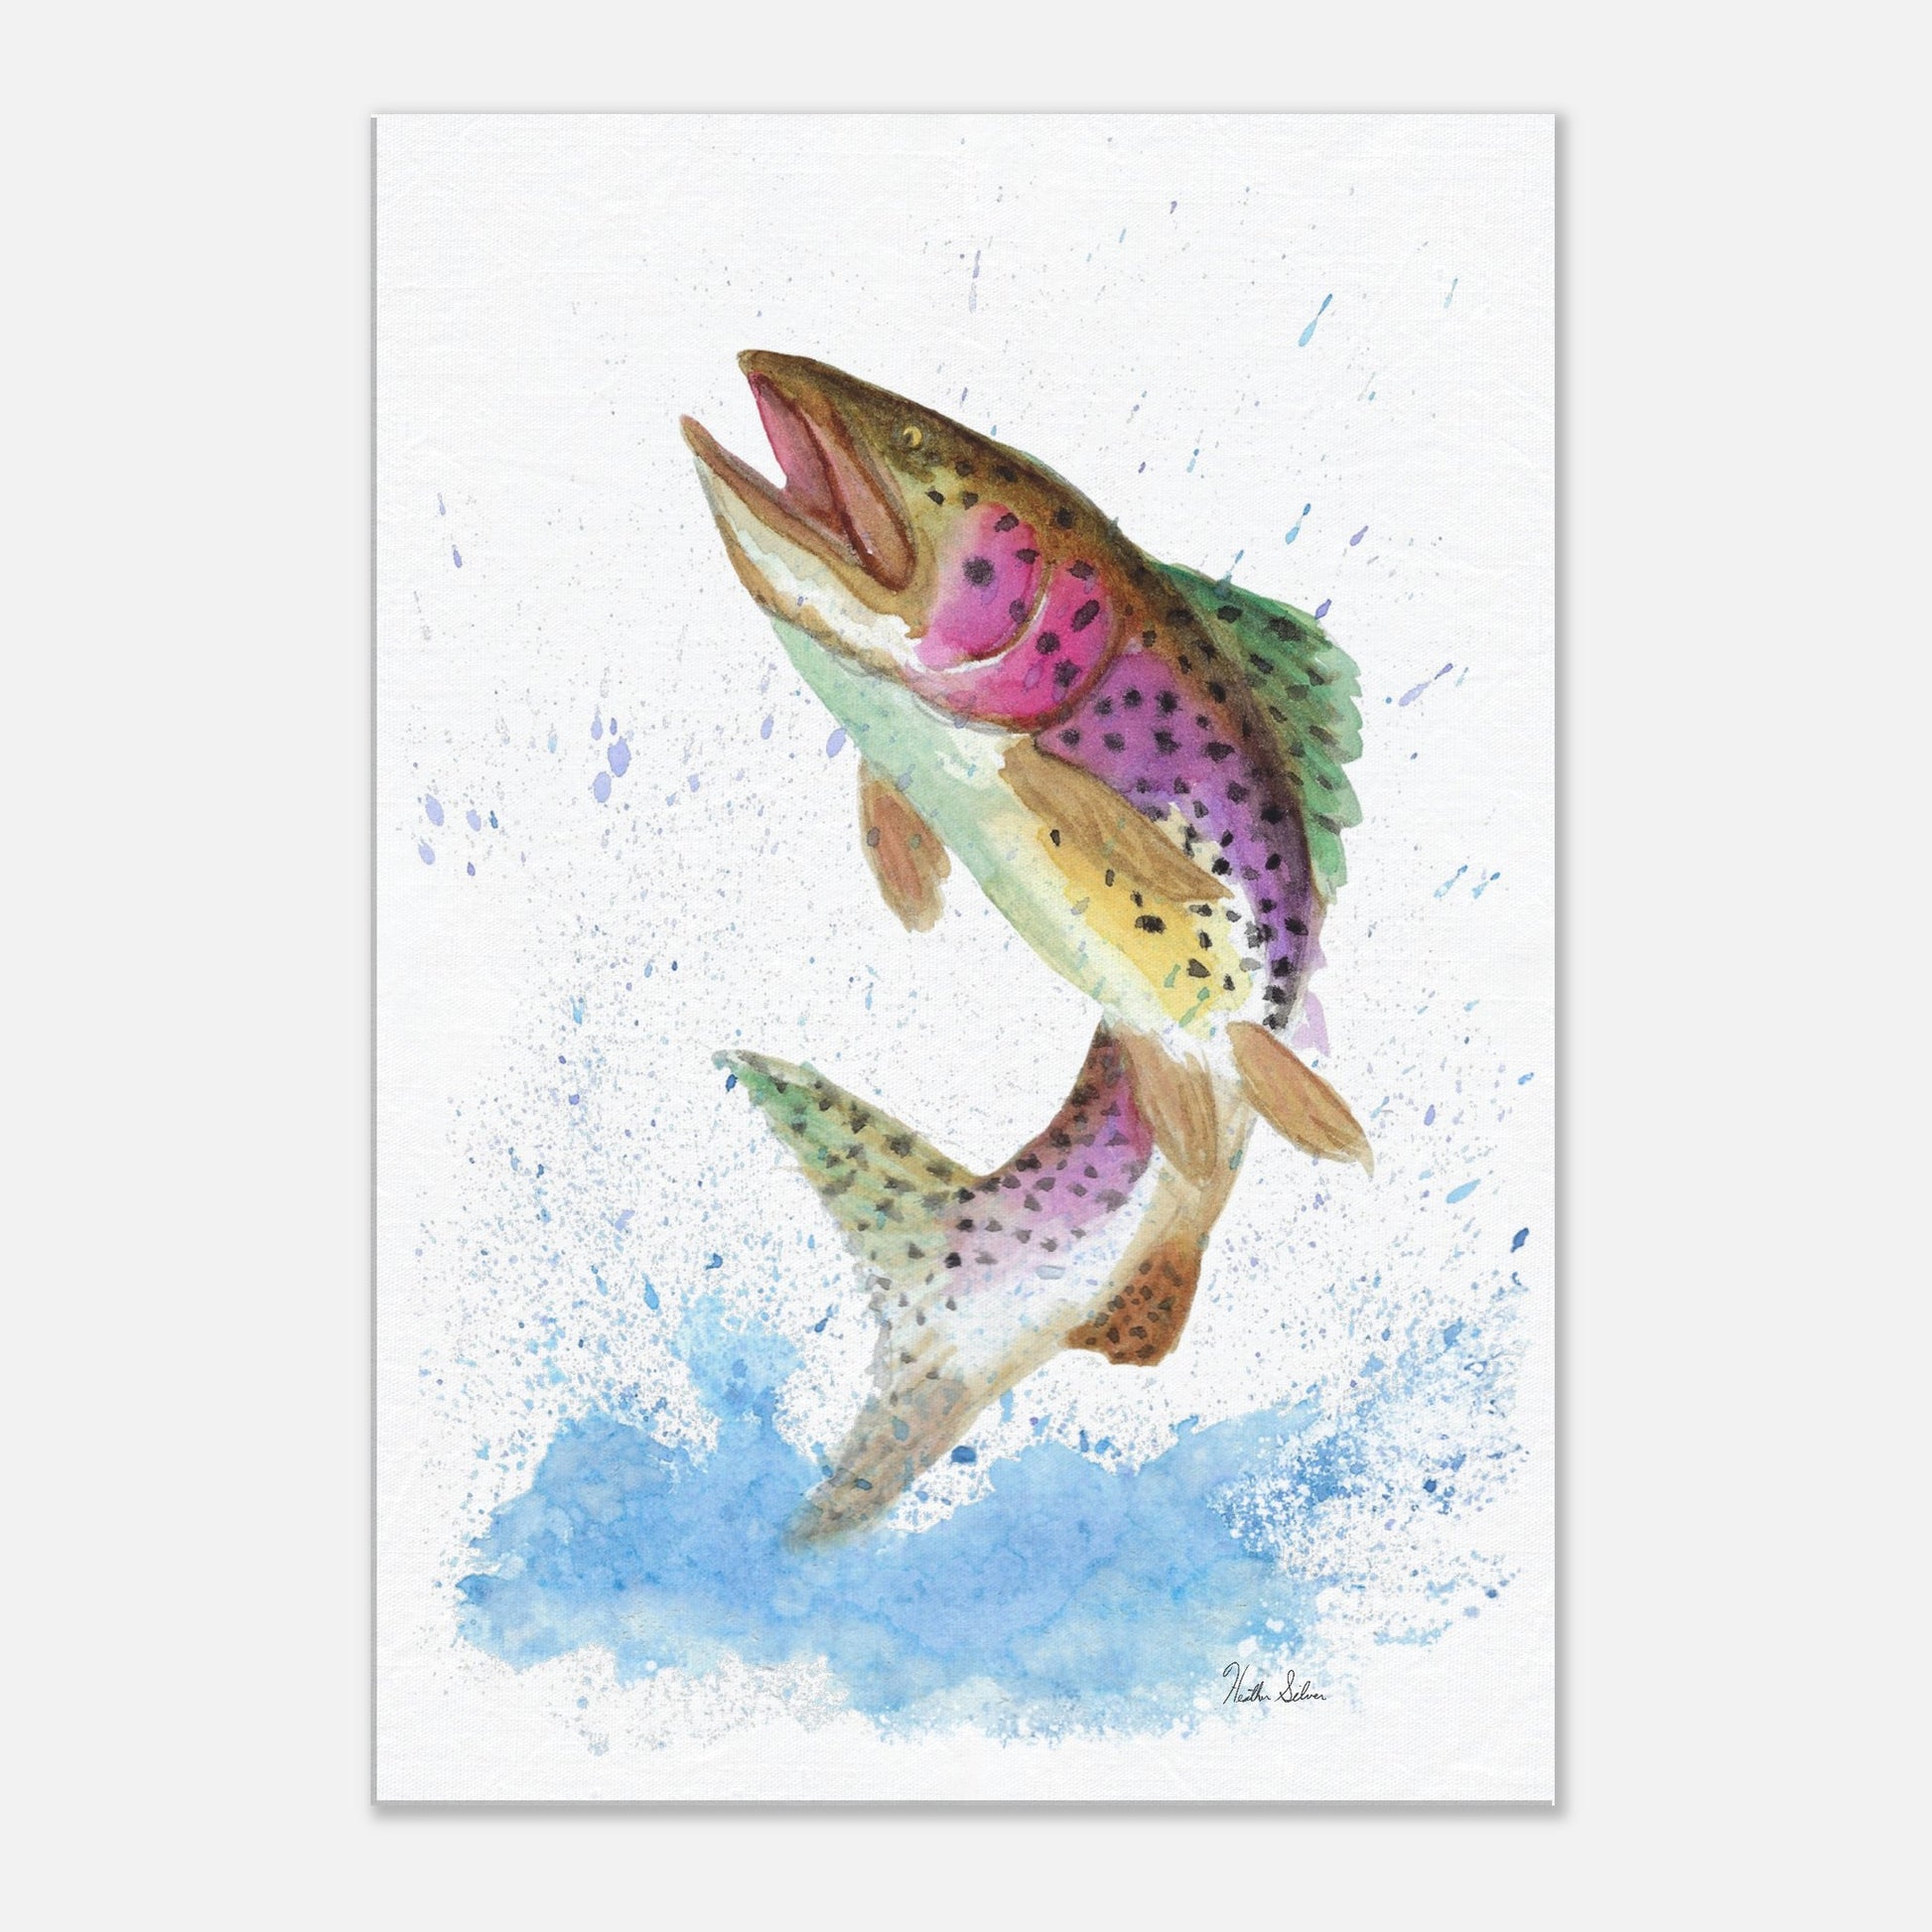 28 by 40 inch slim canvas wall art print featuring a watercolor painting of a rainbow trout leaping from the water. Hanging hardware included.